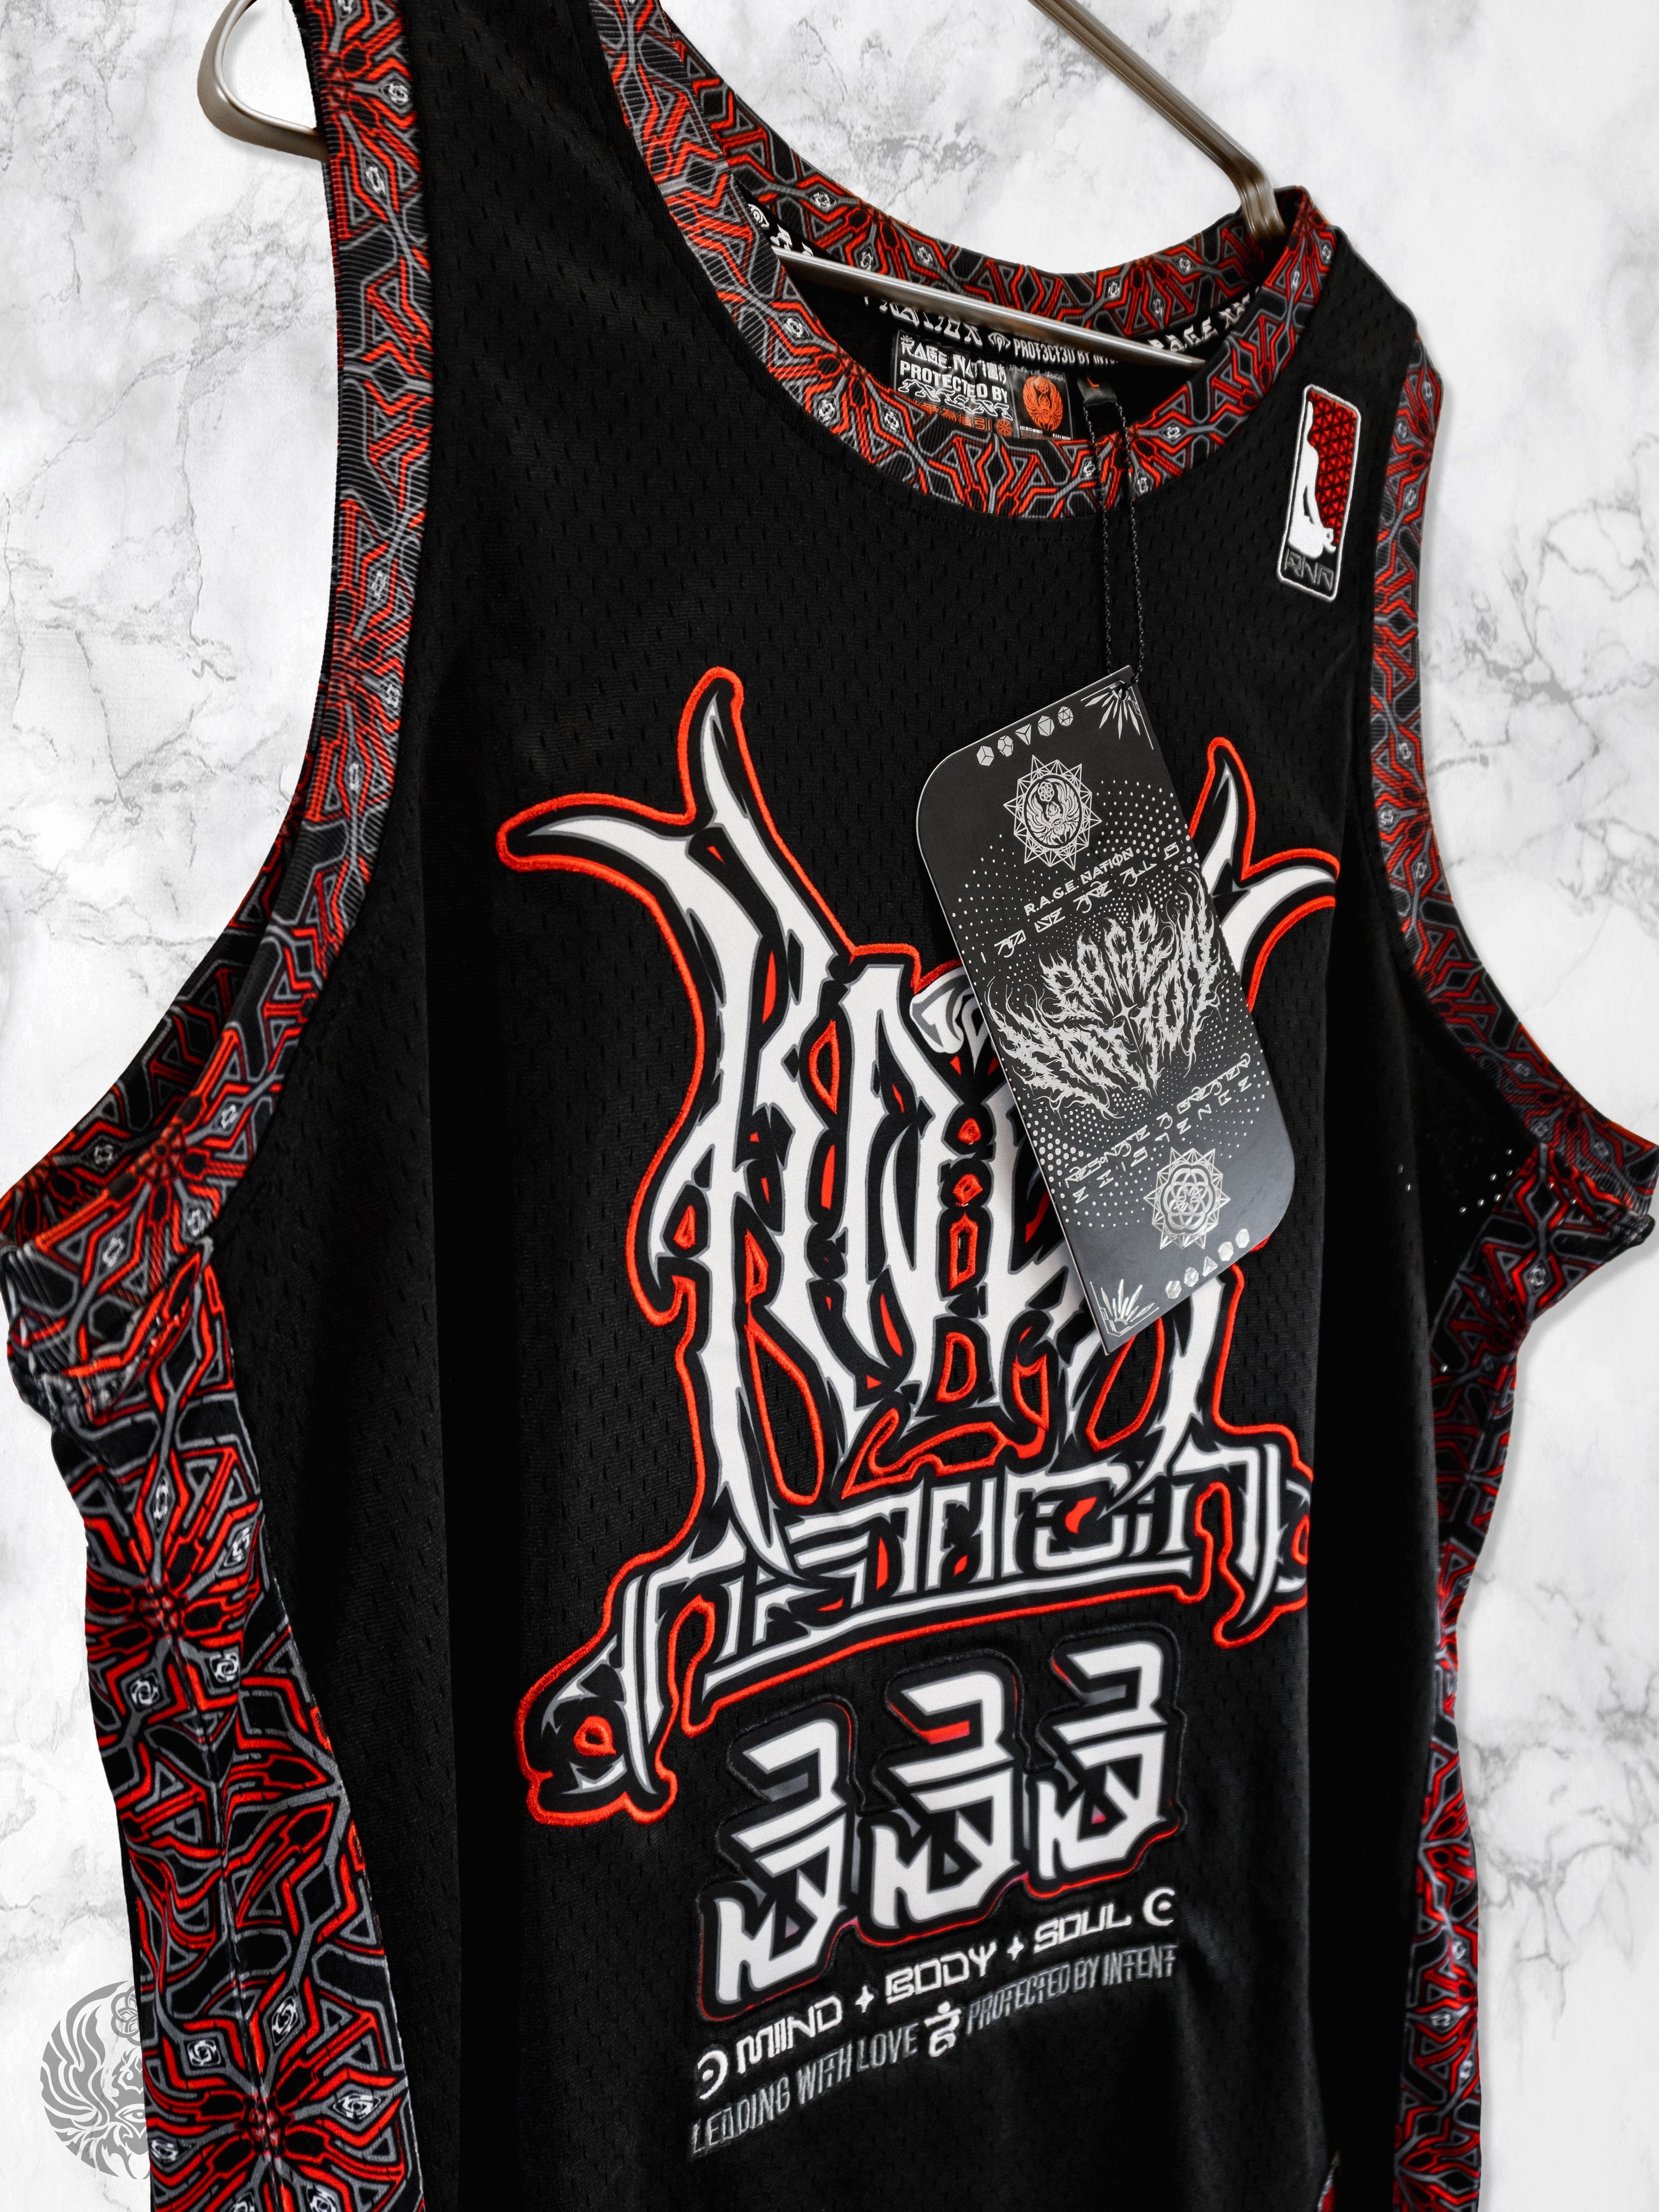 PROTECTED BY INTENT ✦ OG CLASSIC ✦ Basketball Jersey Tank Top 